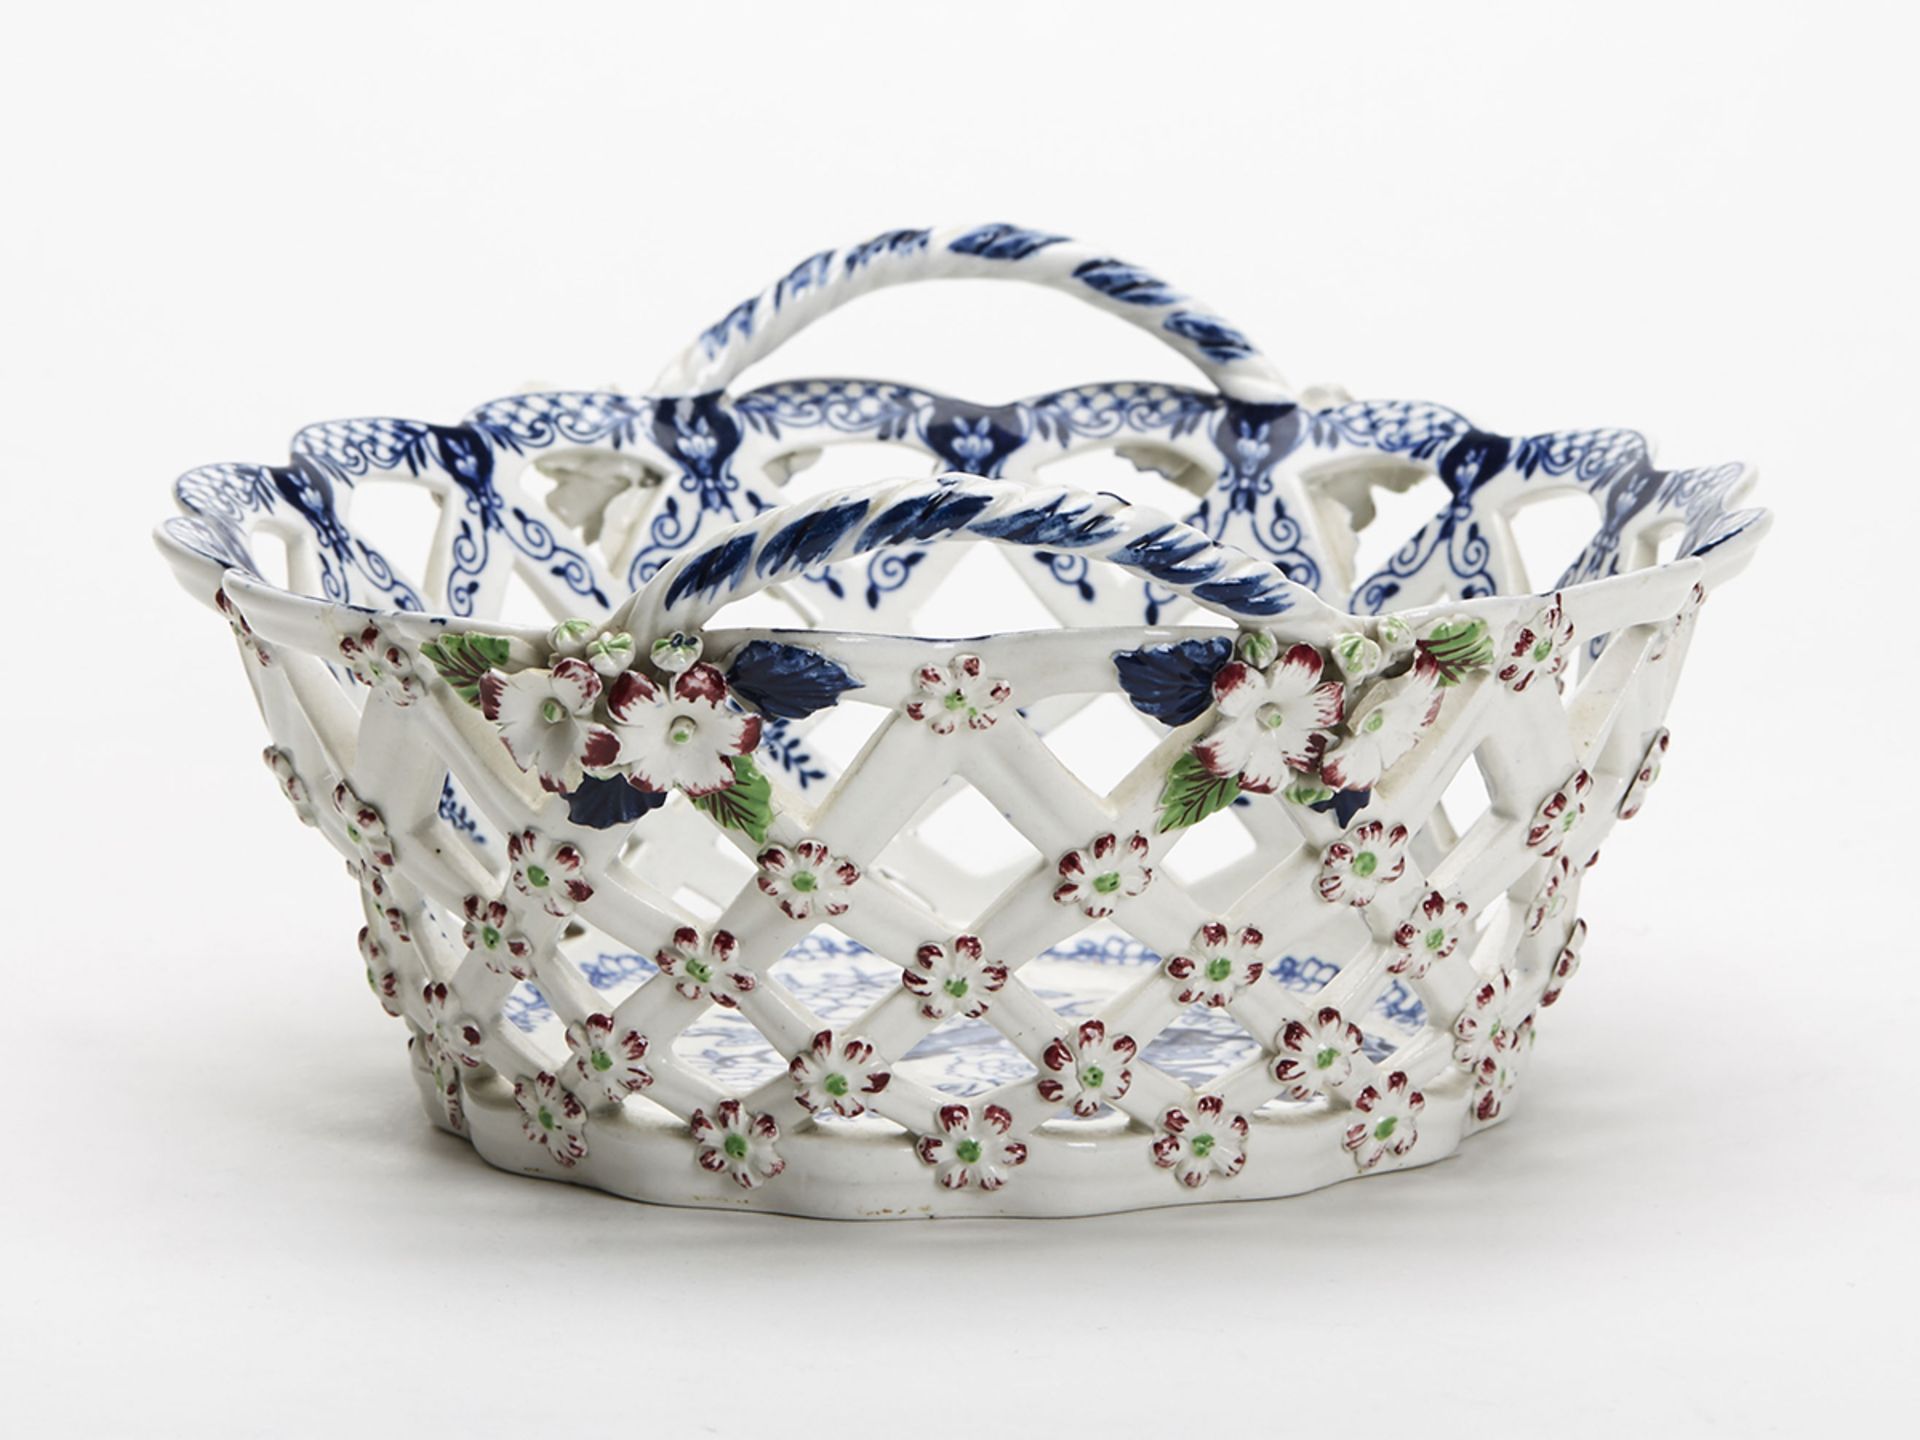 Antique Booths Worcester Blue & White Oval Basket 19Th C. - Image 2 of 8